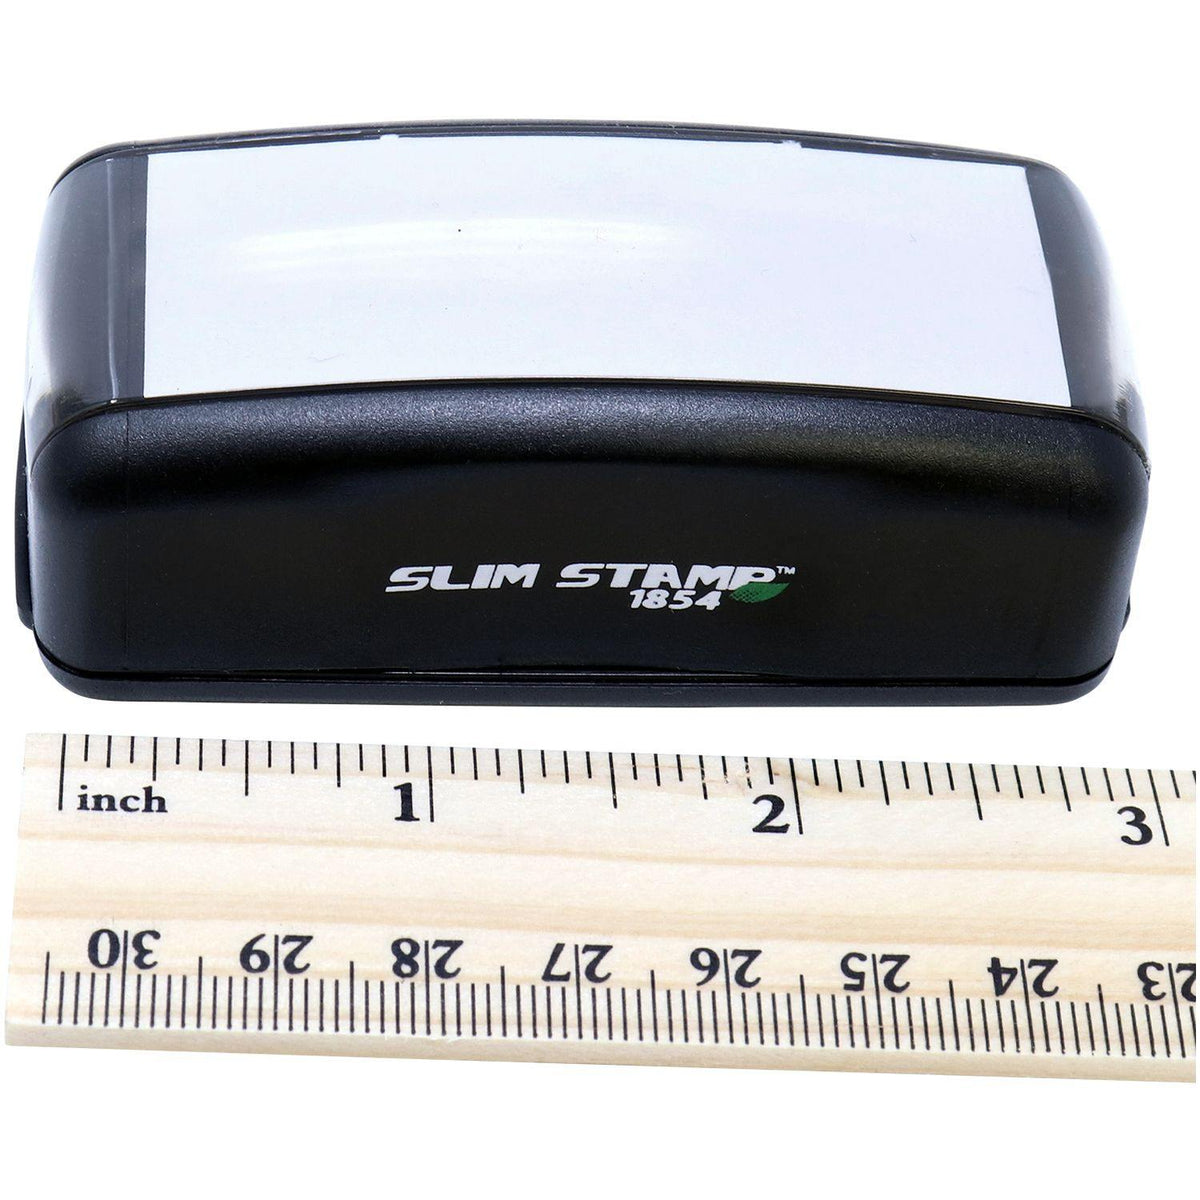 Measurement Large Pre-Inked Review and Sign Stamp with Ruler